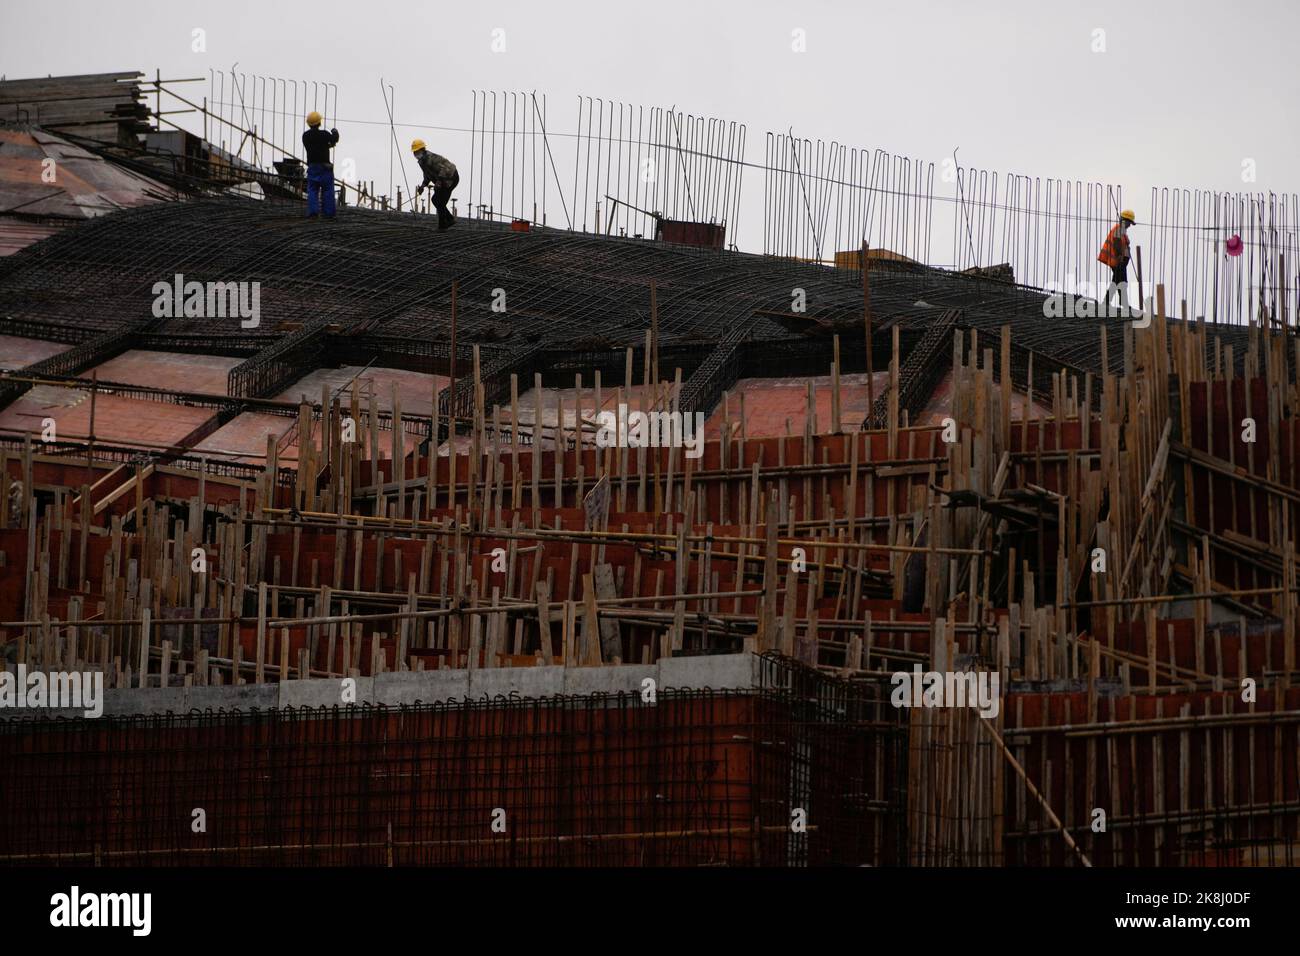 Workers work at a construction site, following the coronavirus disease (COVID-19) outbreak, in Shanghai, China, October 14, 2022. REUTERS/Aly Song Stock Photo